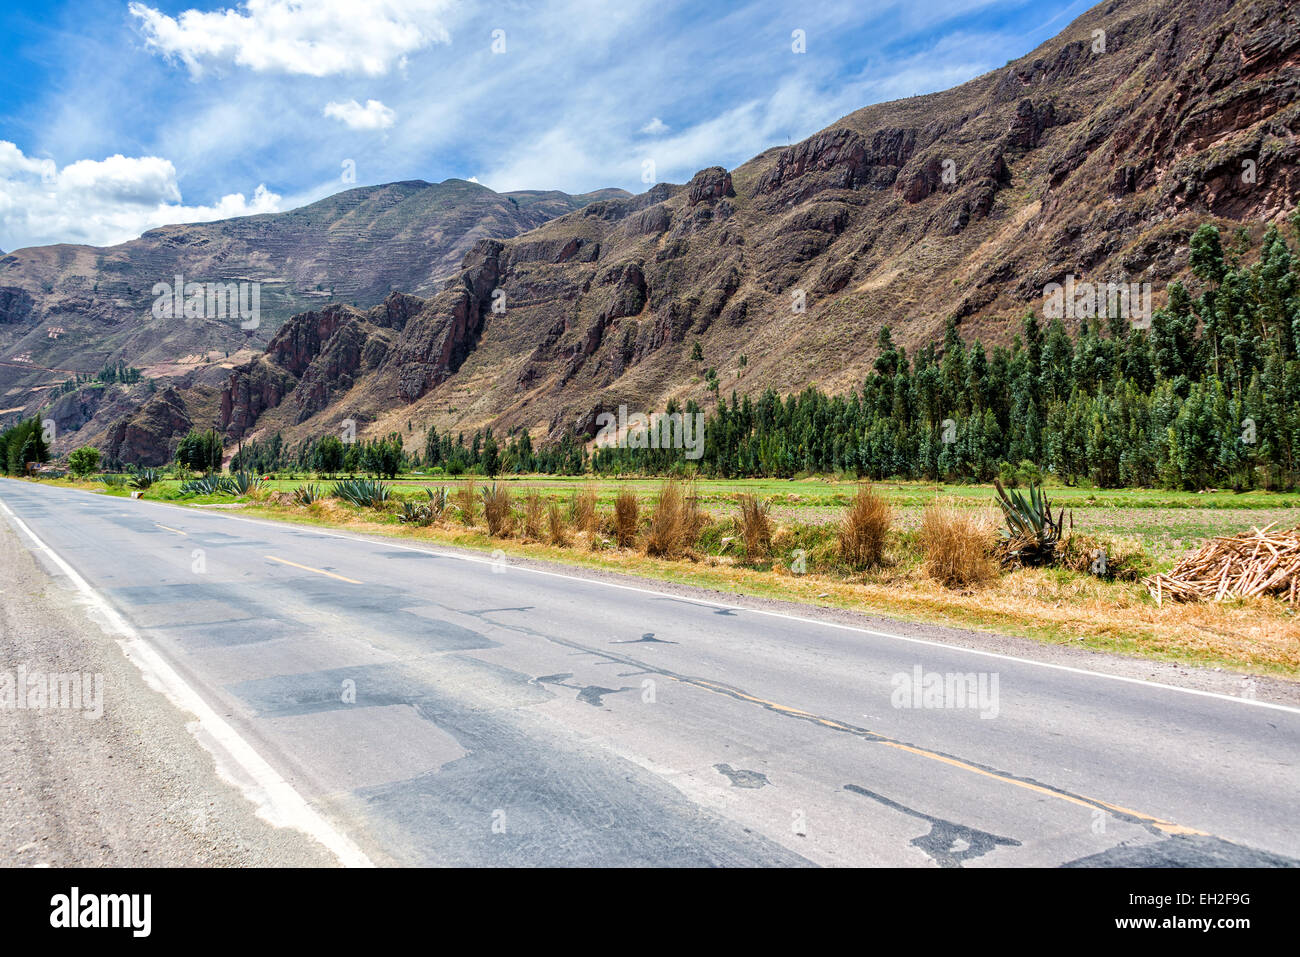 View of a road and the Sacred Valley near Pisac, Peru Stock Photo